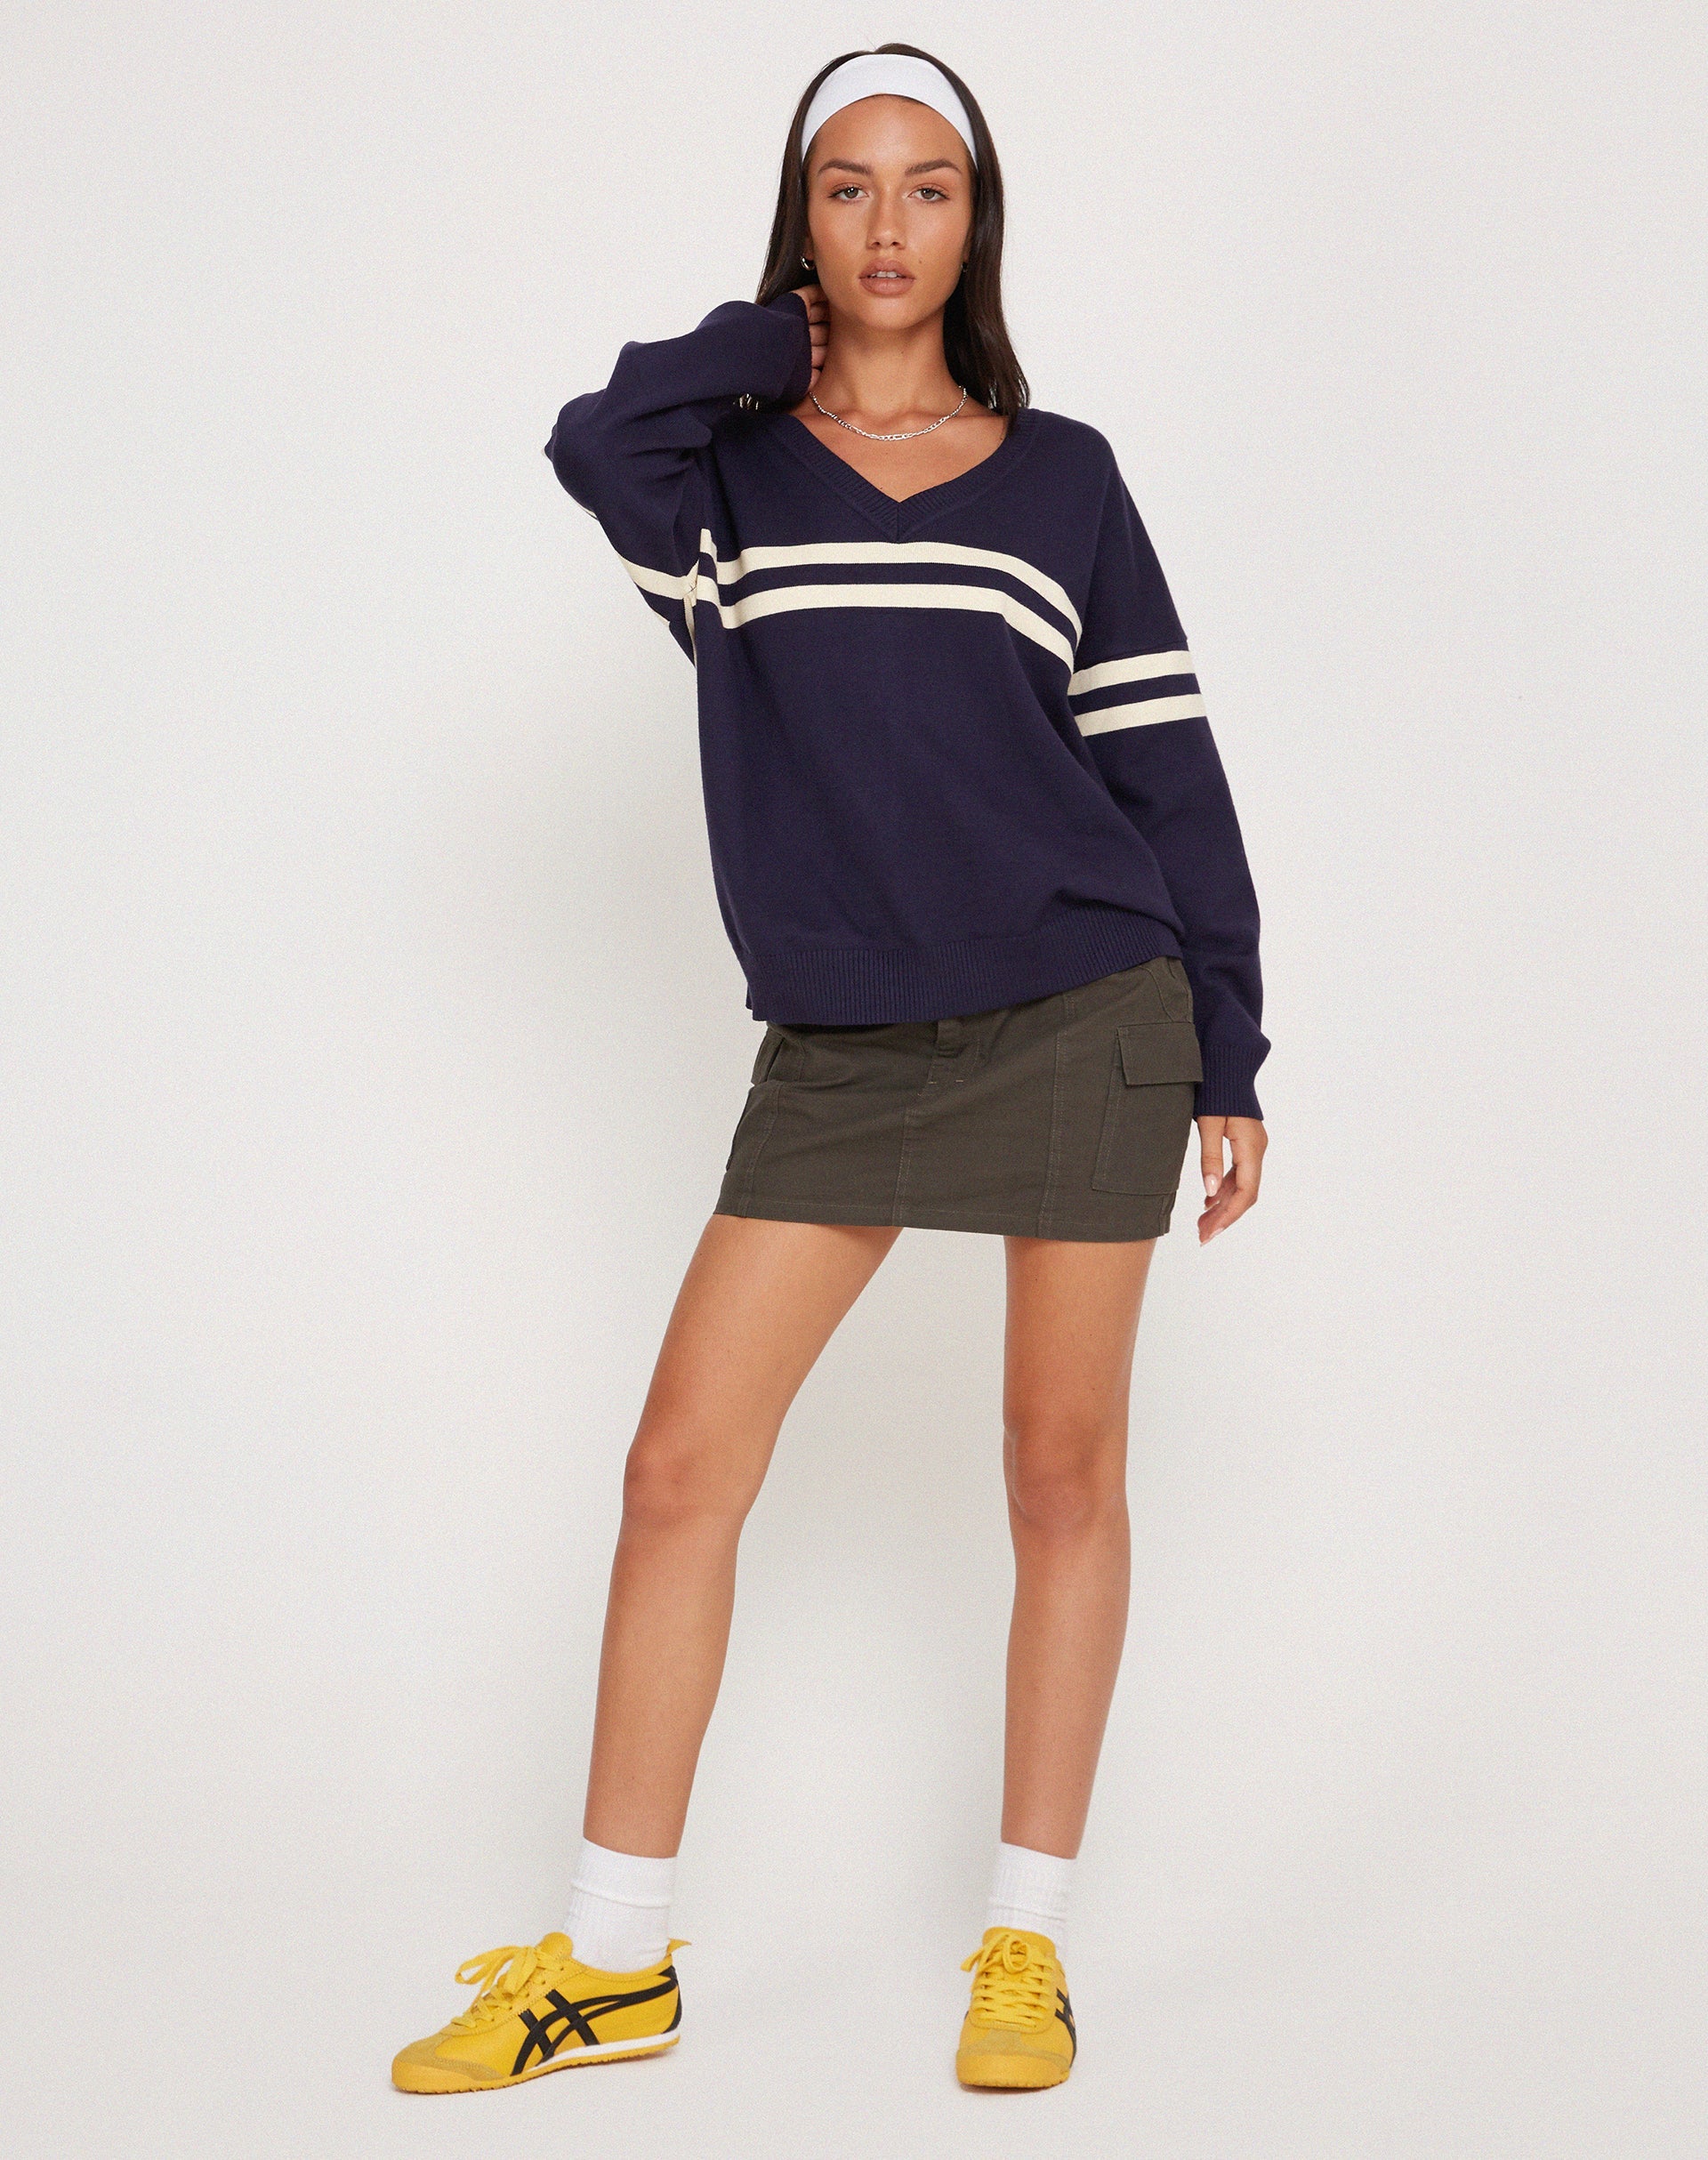 Image of Louna Jumper in Peacoat Blue with White Stripe